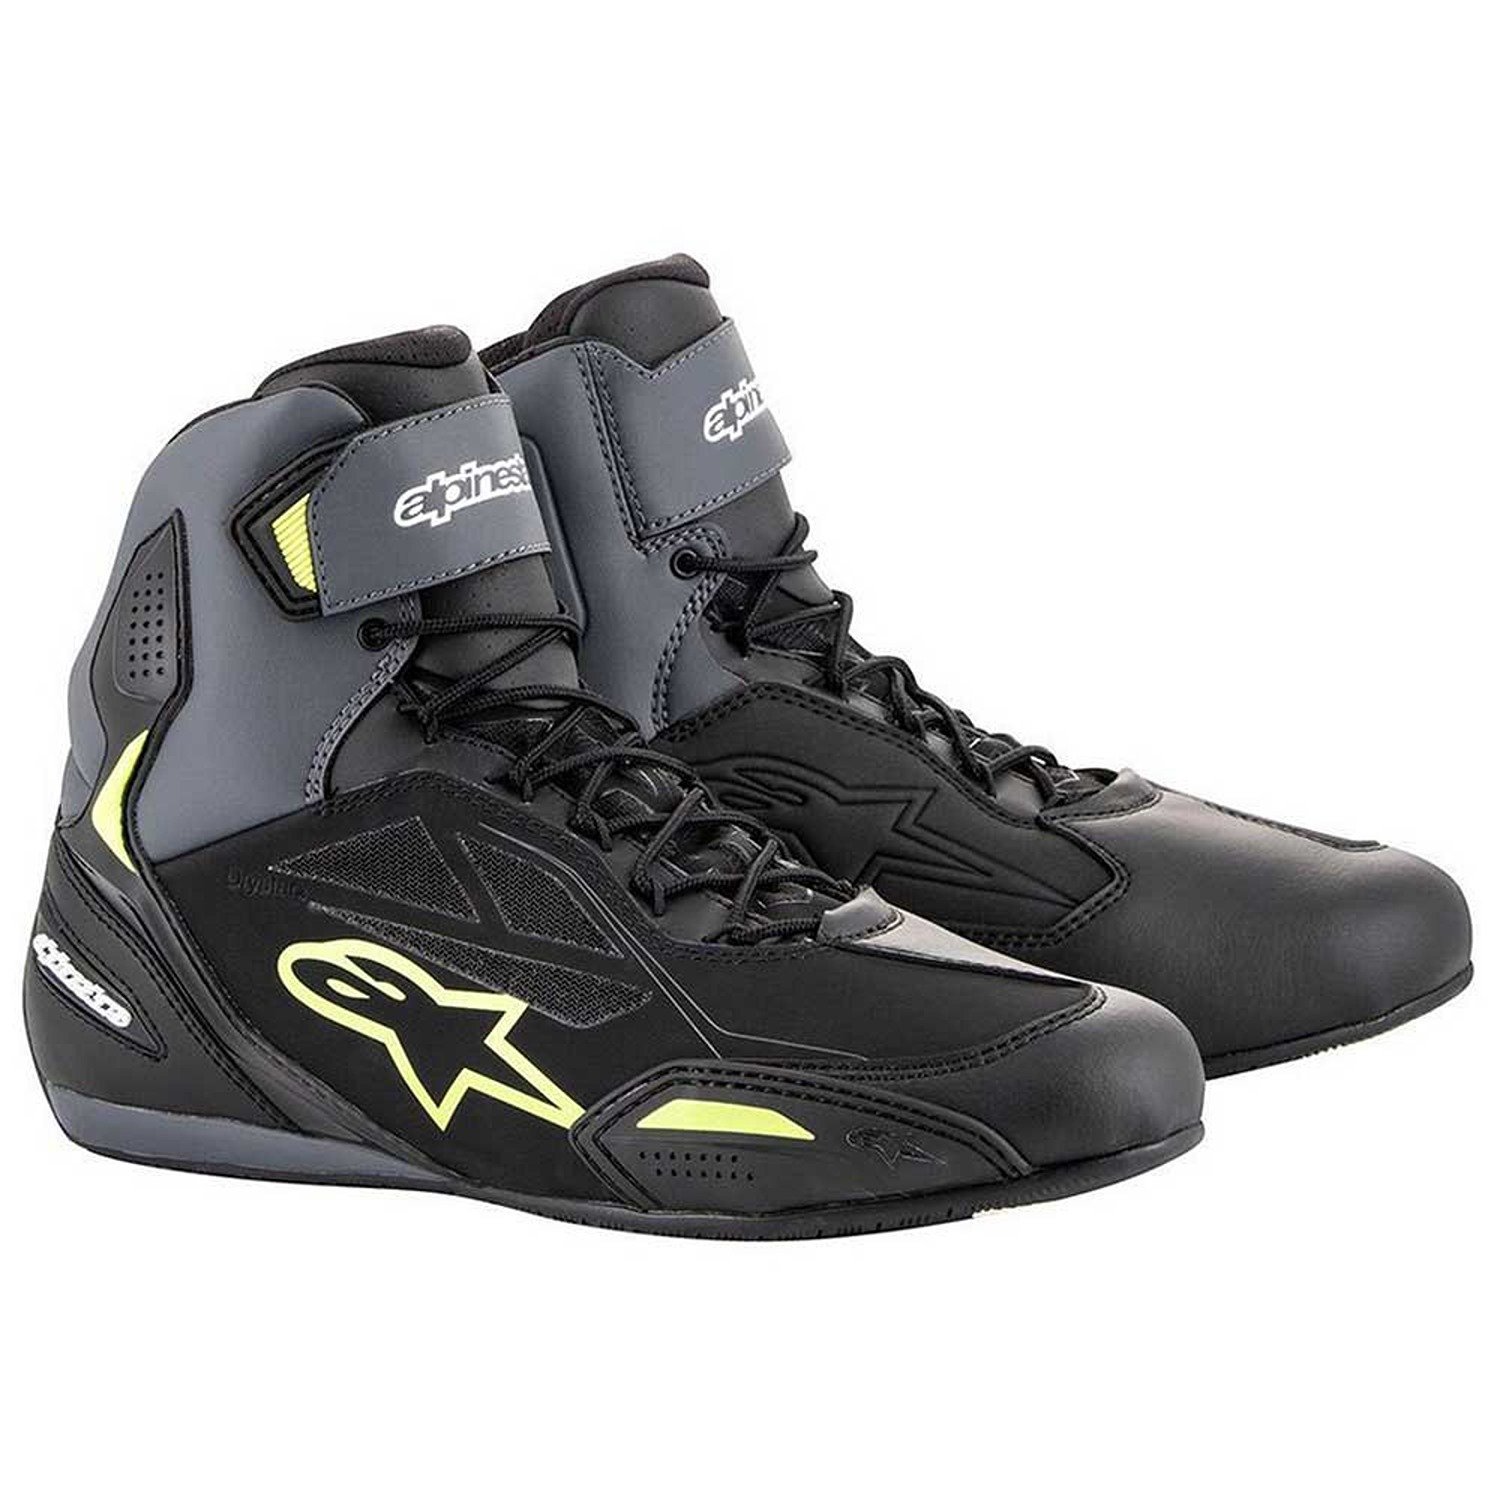 Image of Alpinestars Faster-3 Shoes Black Yellow Fluo Talla US 6